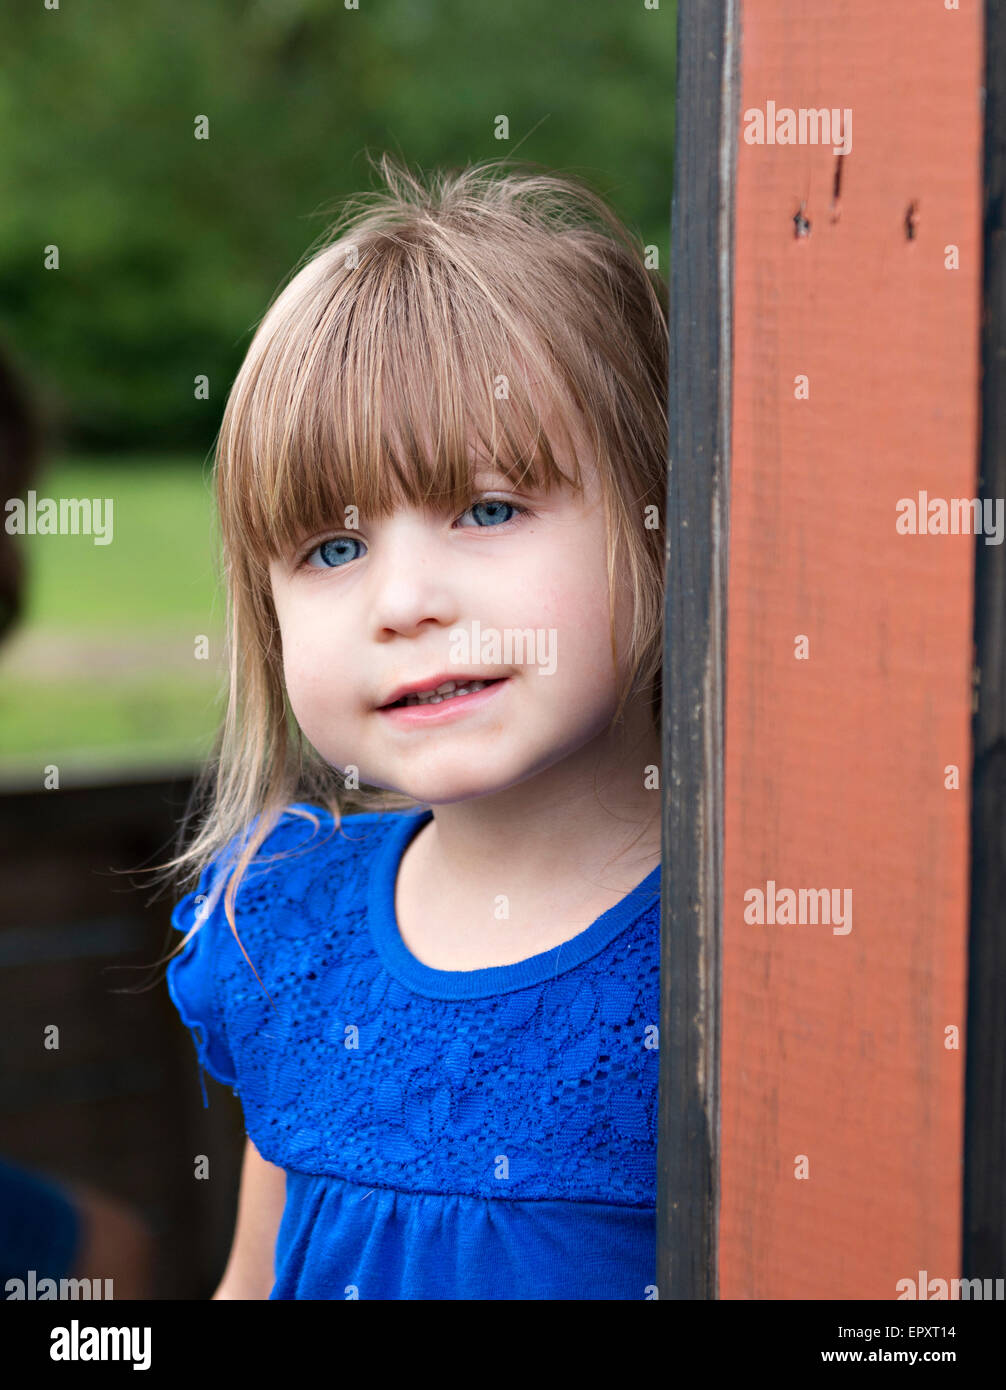 Outdoor portrait of brown hair blue eye child Stock Photo